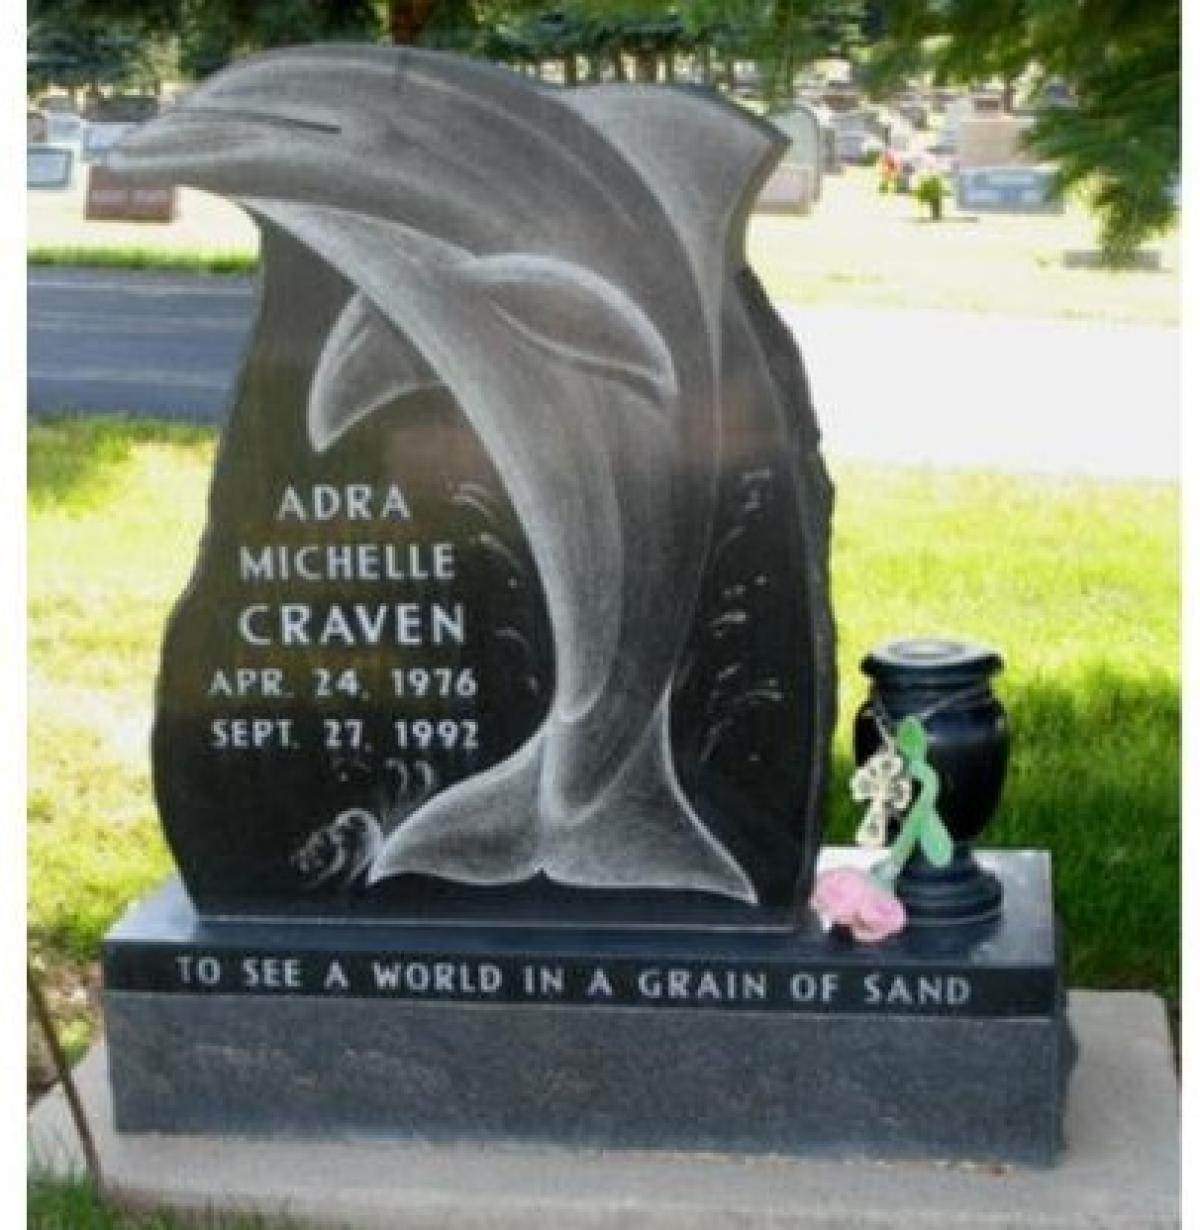 OK, Grove, Headstone Symbols and Meanings, Dolphin